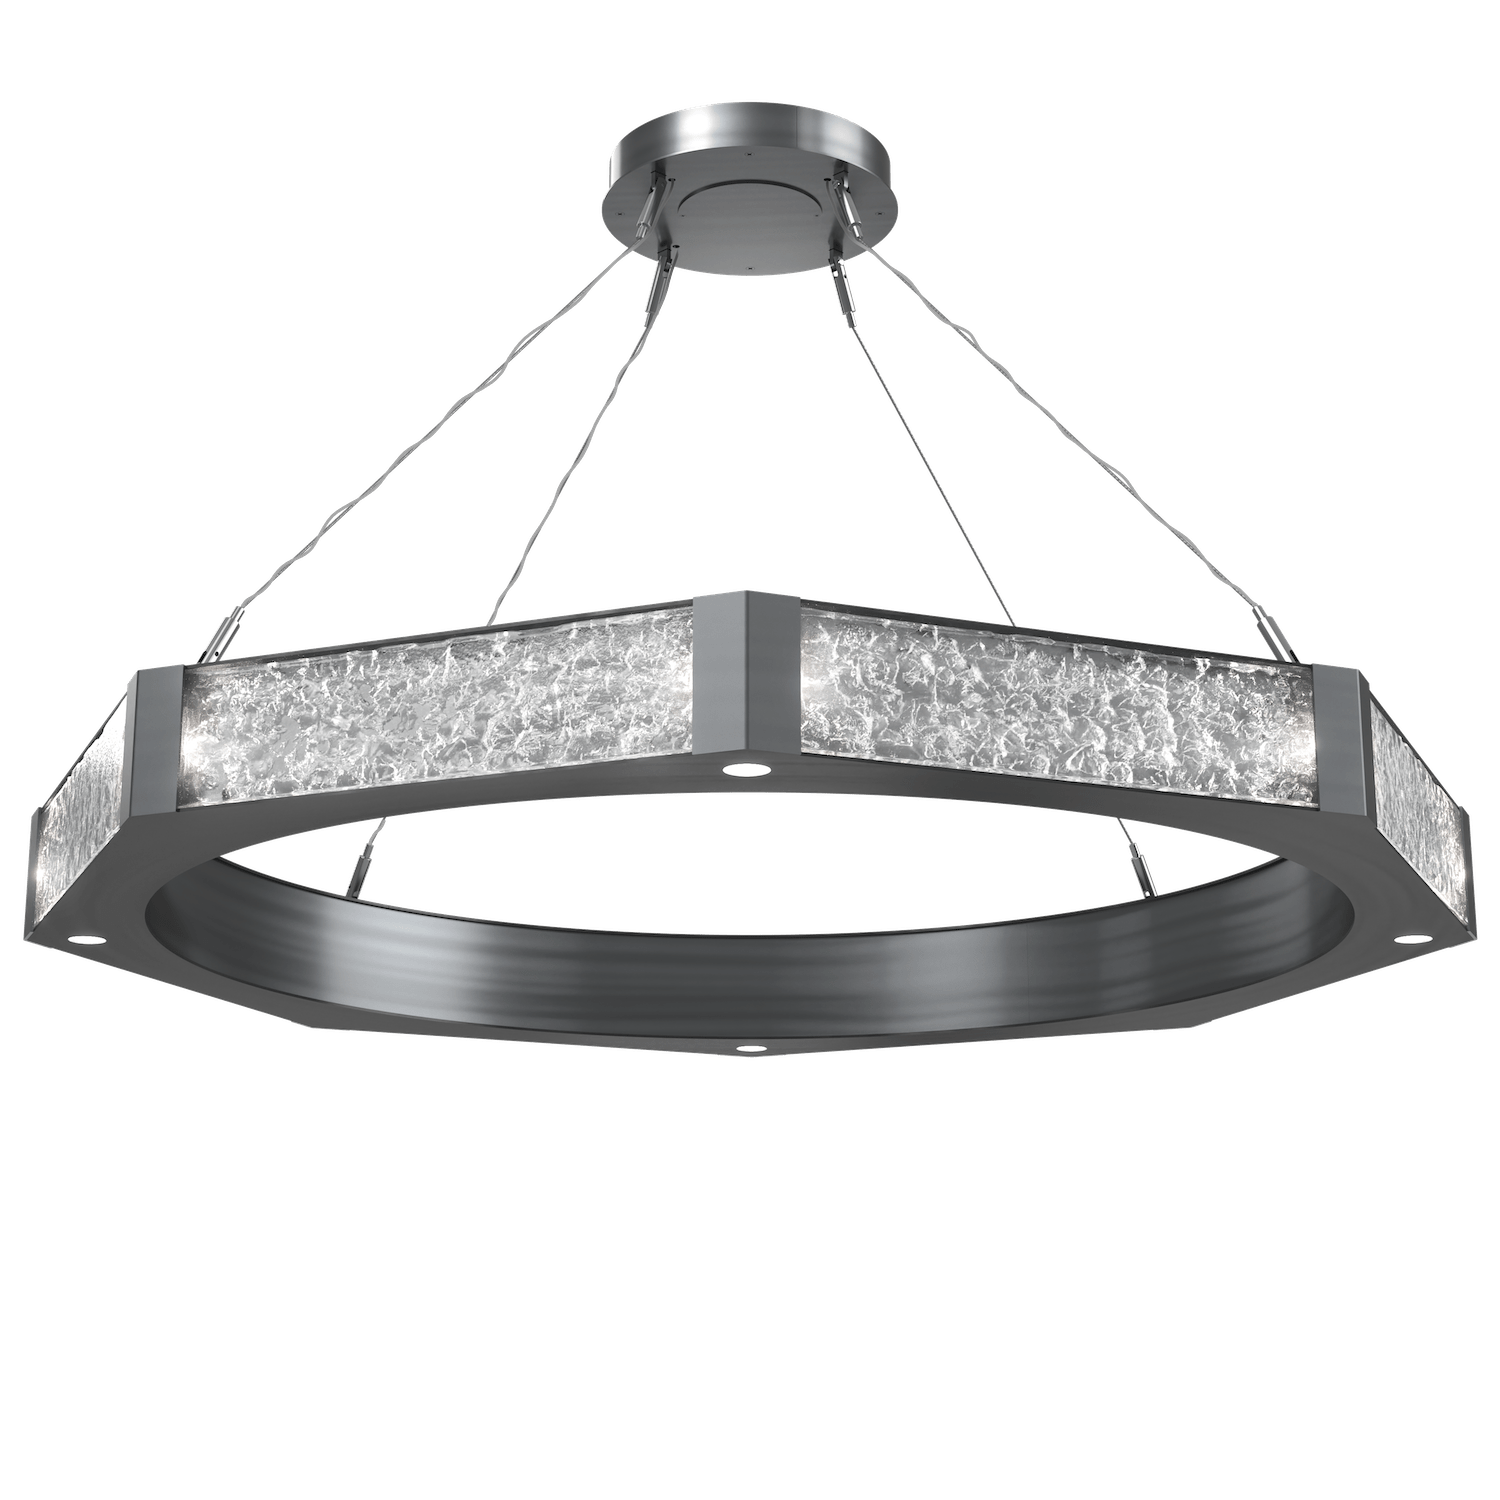 CHB0061-48-GM-GC-Hammerton-Studio-Glacier-48-inch-ring-chandelier-with-gunmetal-finish-and-clear-blown-glass-with-geo-clear-cast-glass-diffusers-and-LED-lamping